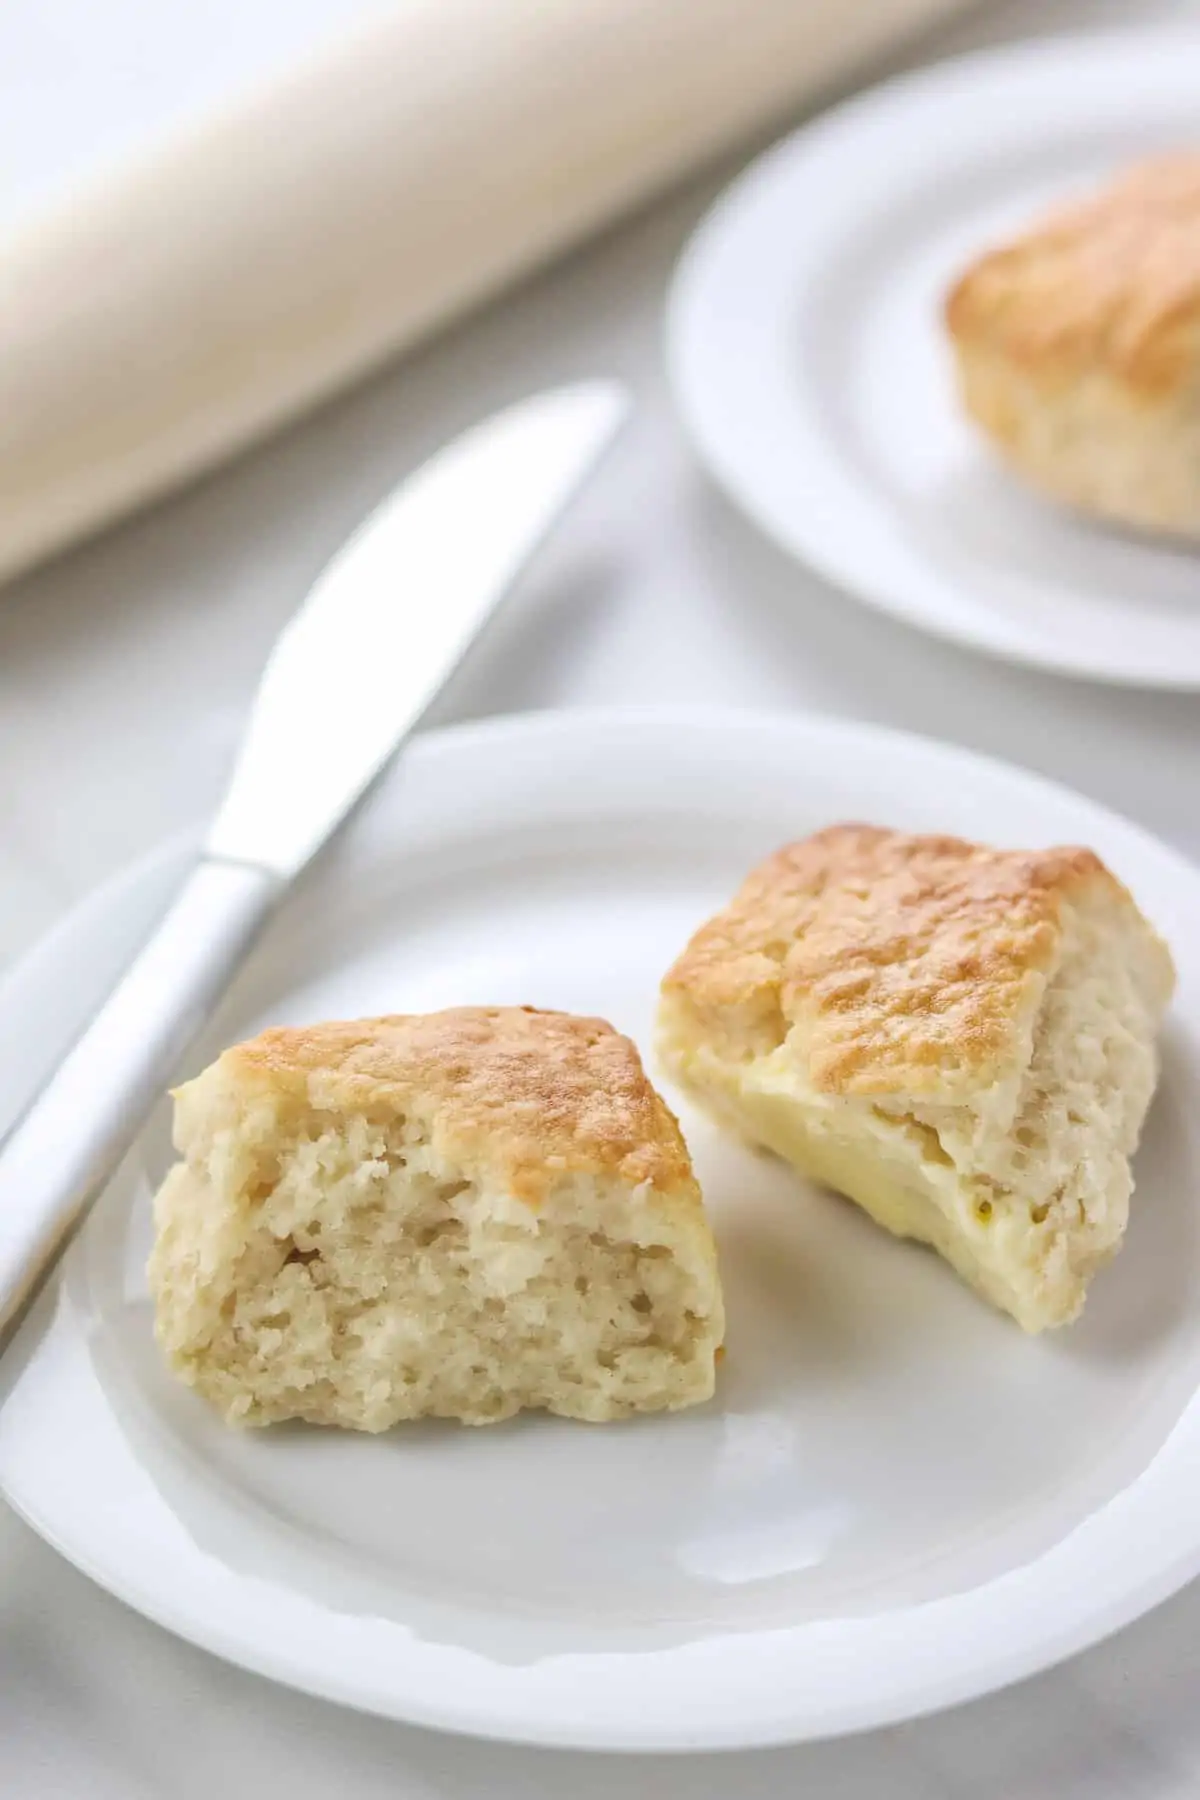 biscuit cut in half on a white plate with a knife and rolling pin